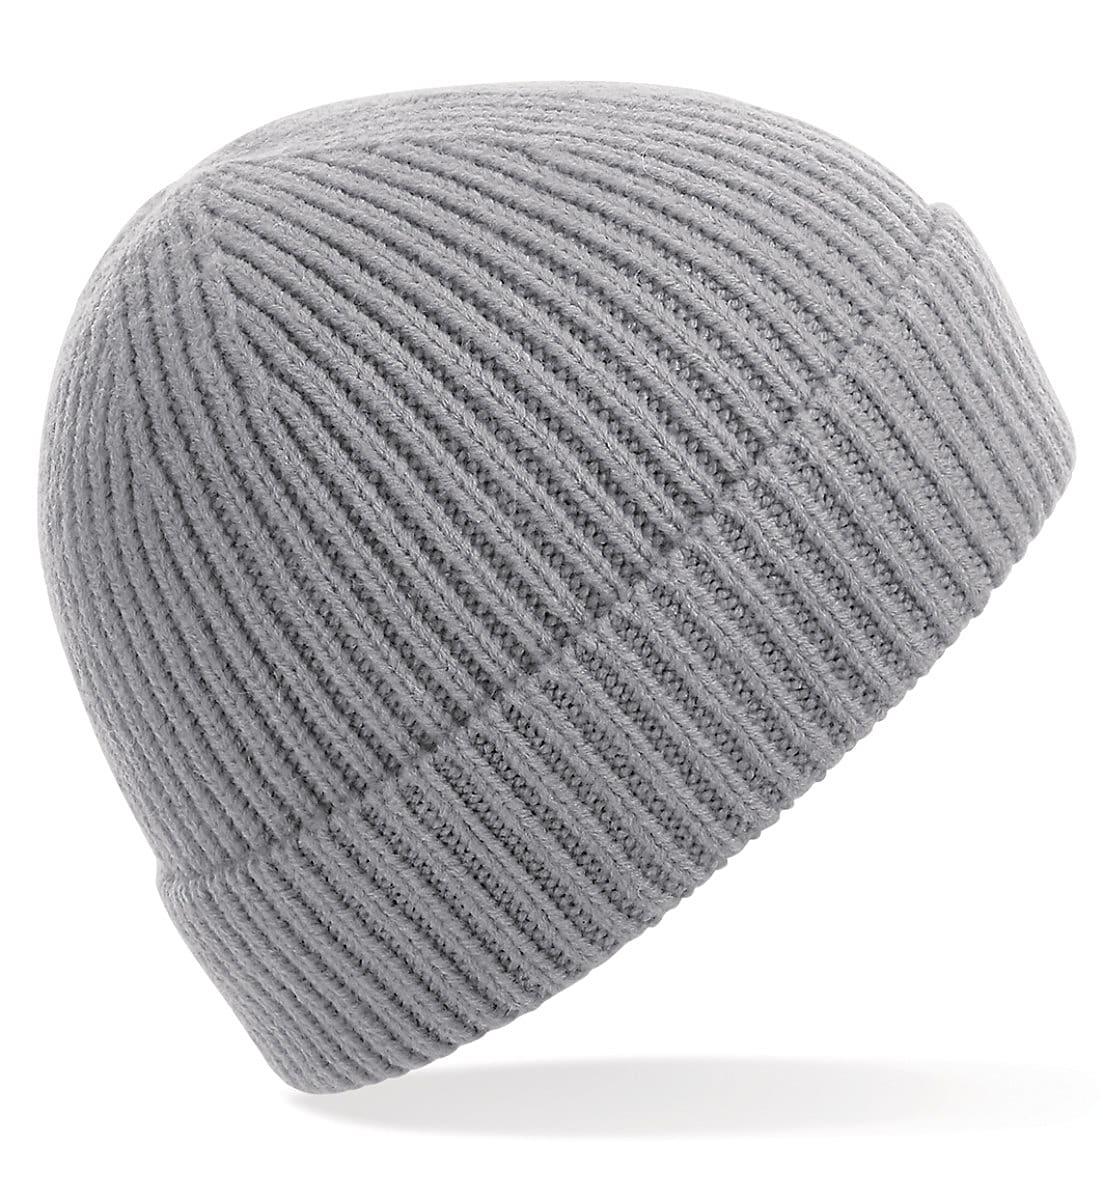 Beechfield Engineered Knit Ribbed Beanie Hat in Light Grey (Product Code: B380)